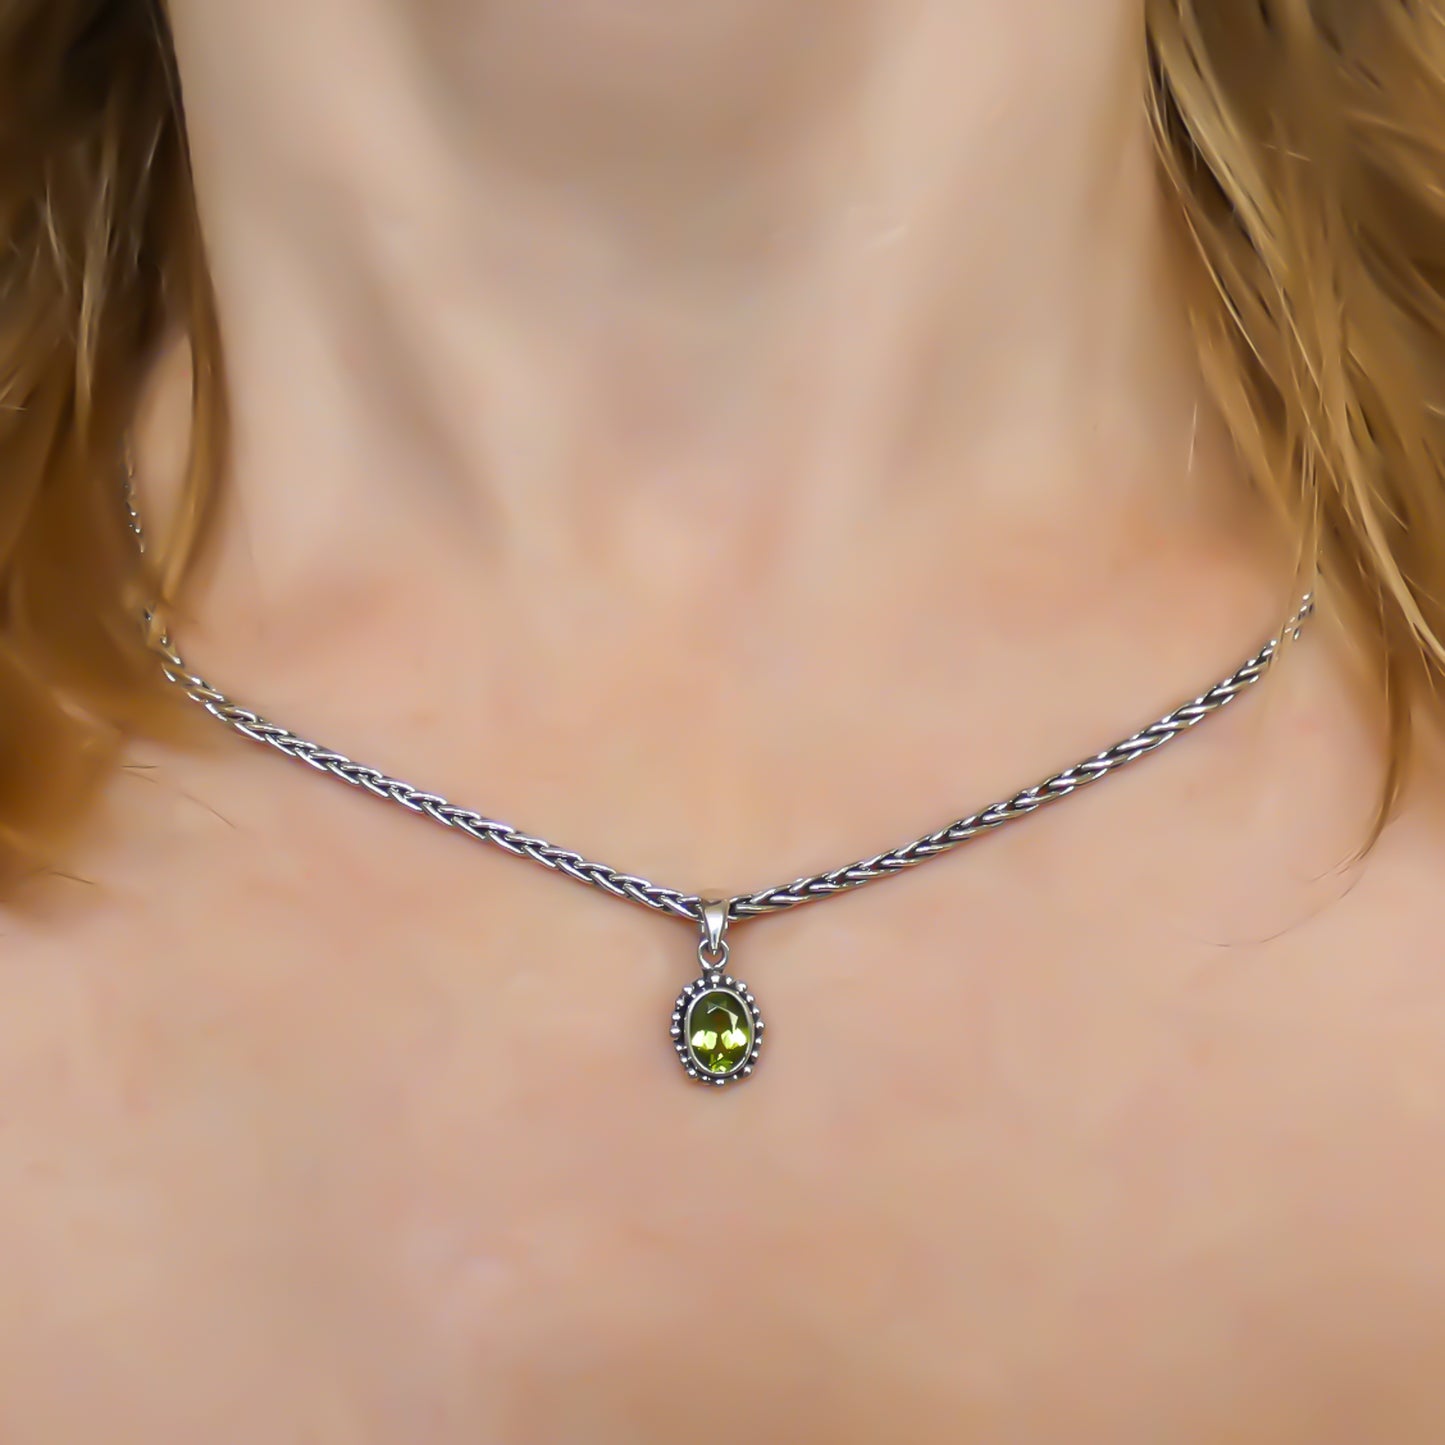 P004PD PADMA .925 Sterling Silver with Vibrant Green Peridot Pendant.